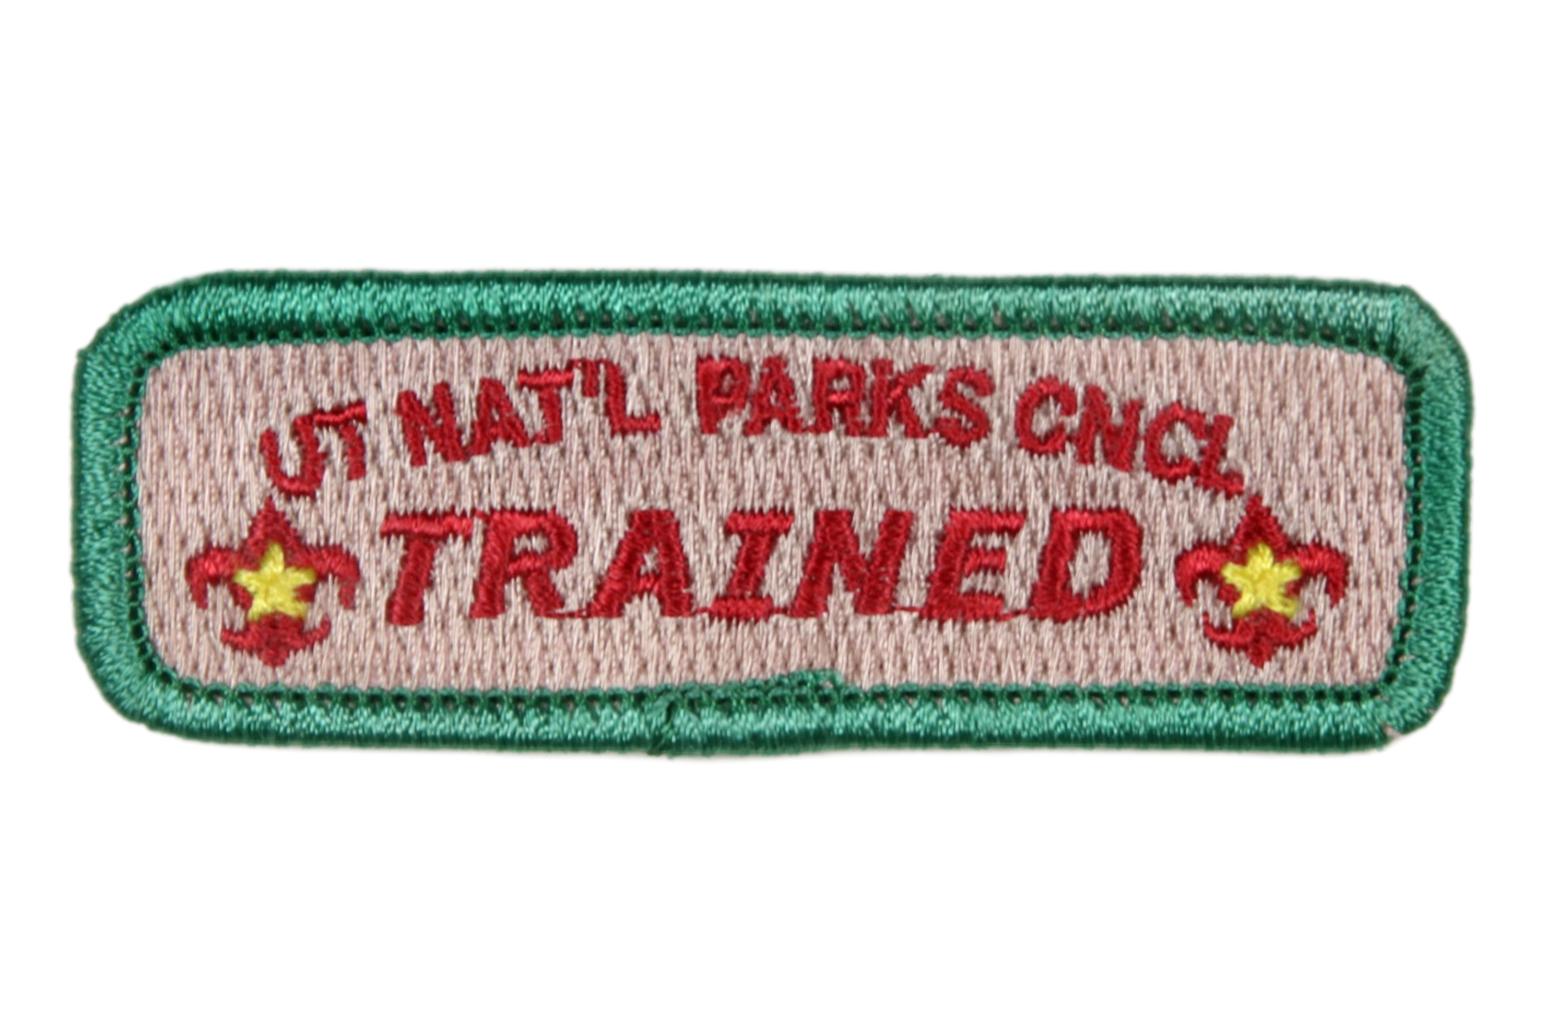 Utah National Parks Council Trained Patch